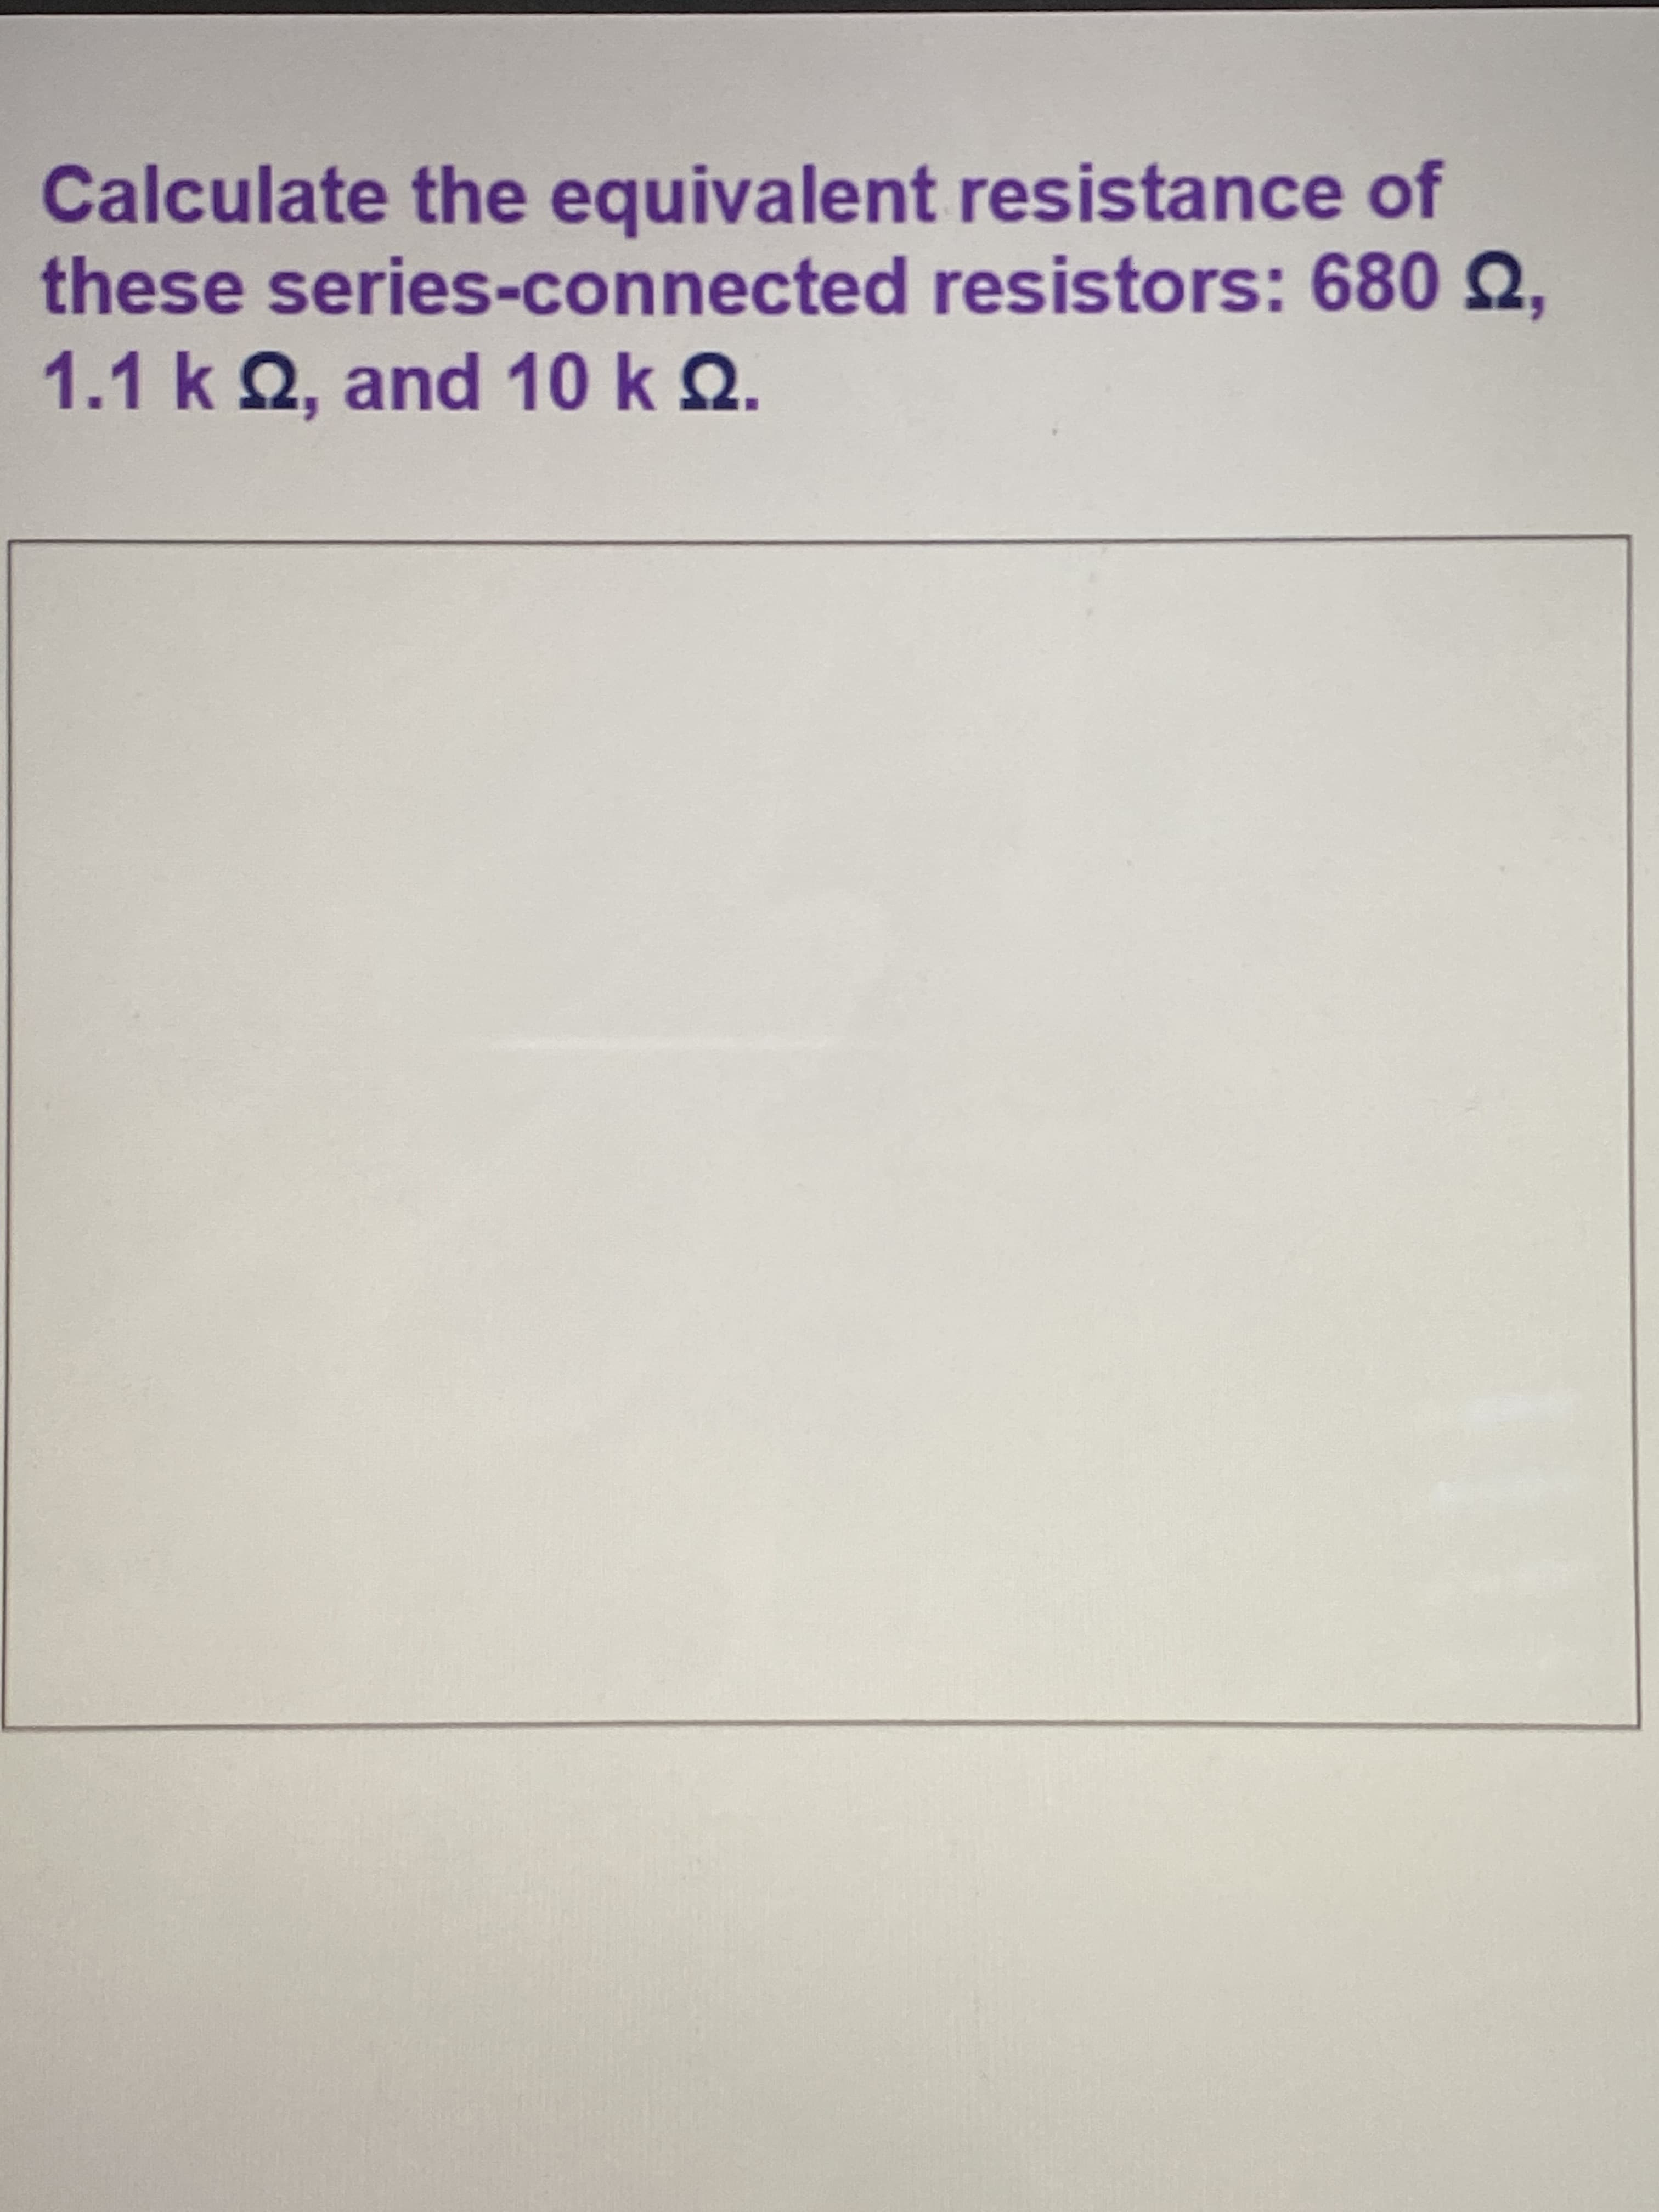 Calculate the equivalent resistance of
these series-connected resistors: 680 Q,
1.1 k 2, and 10 k Q.
